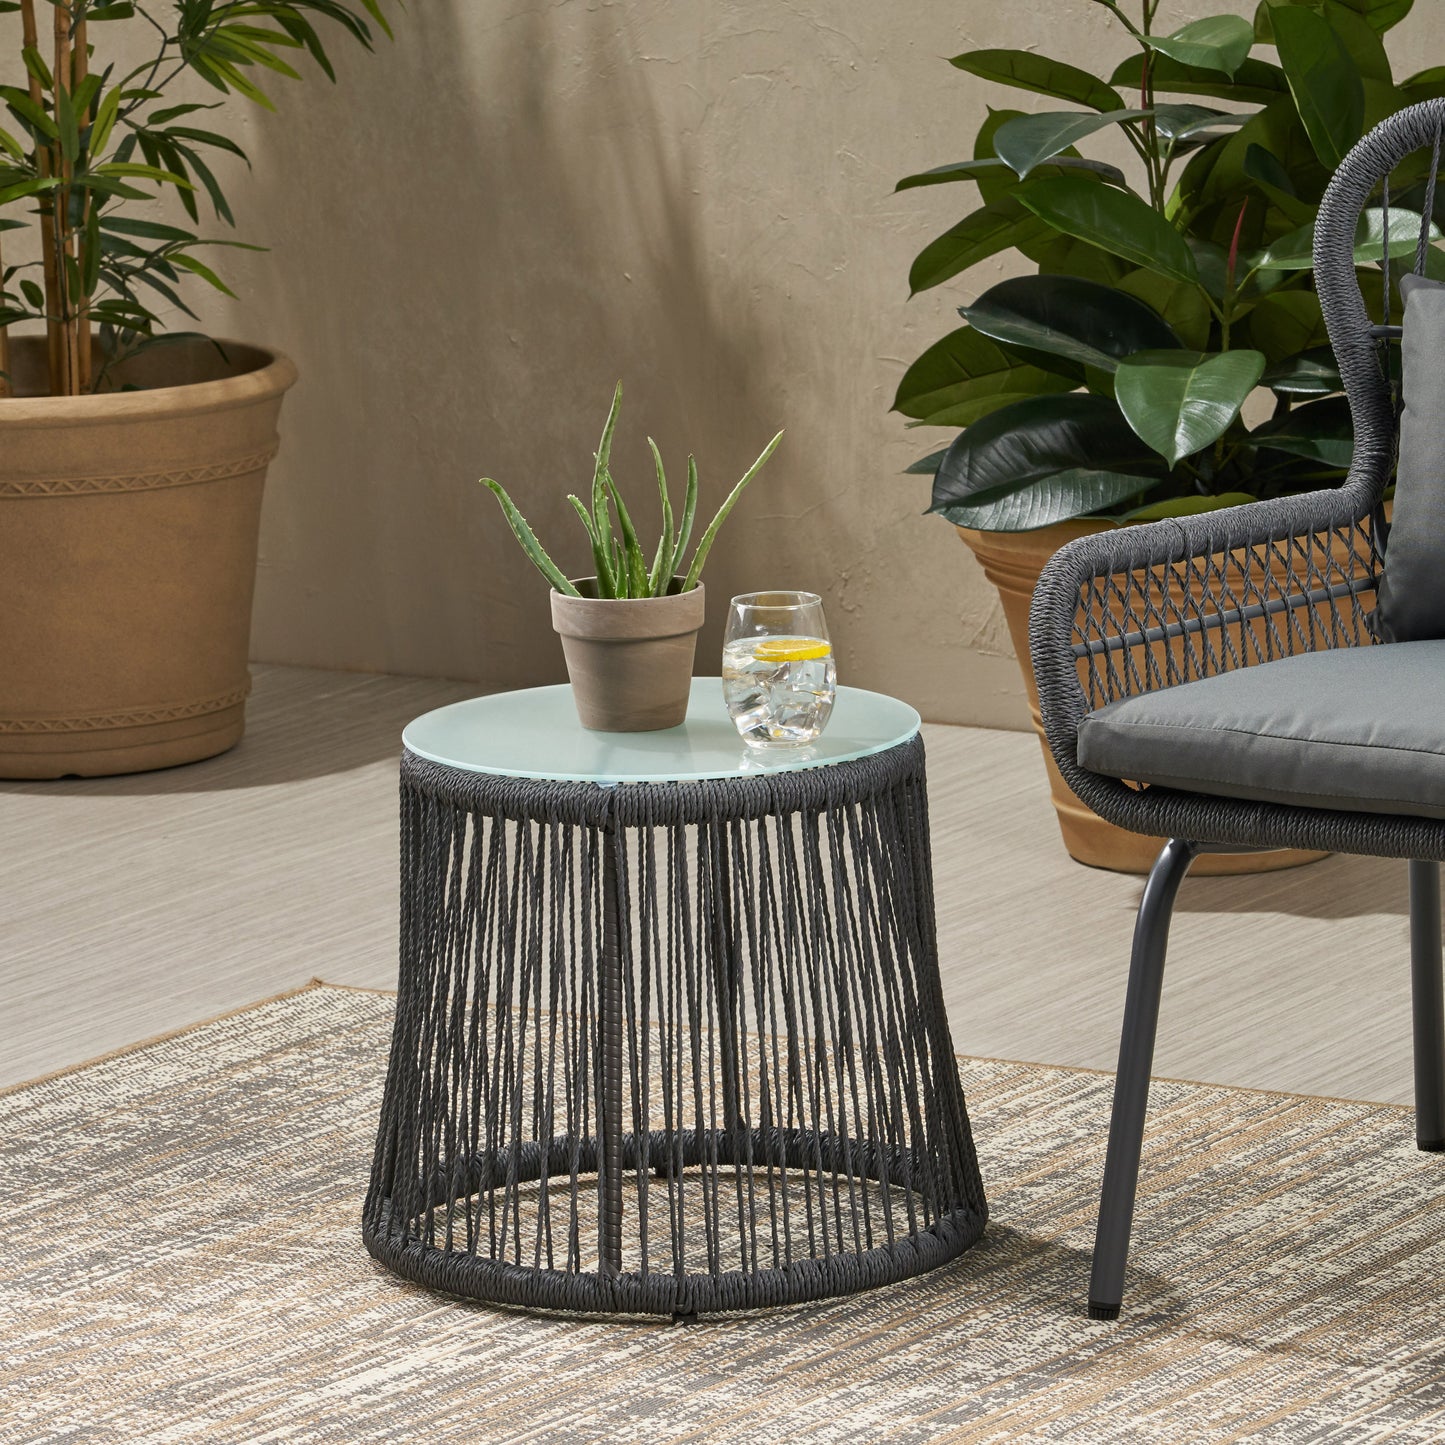 Karen Outdoor Side Table, Steel and Rope, Tempered Glass Table Top, Boho